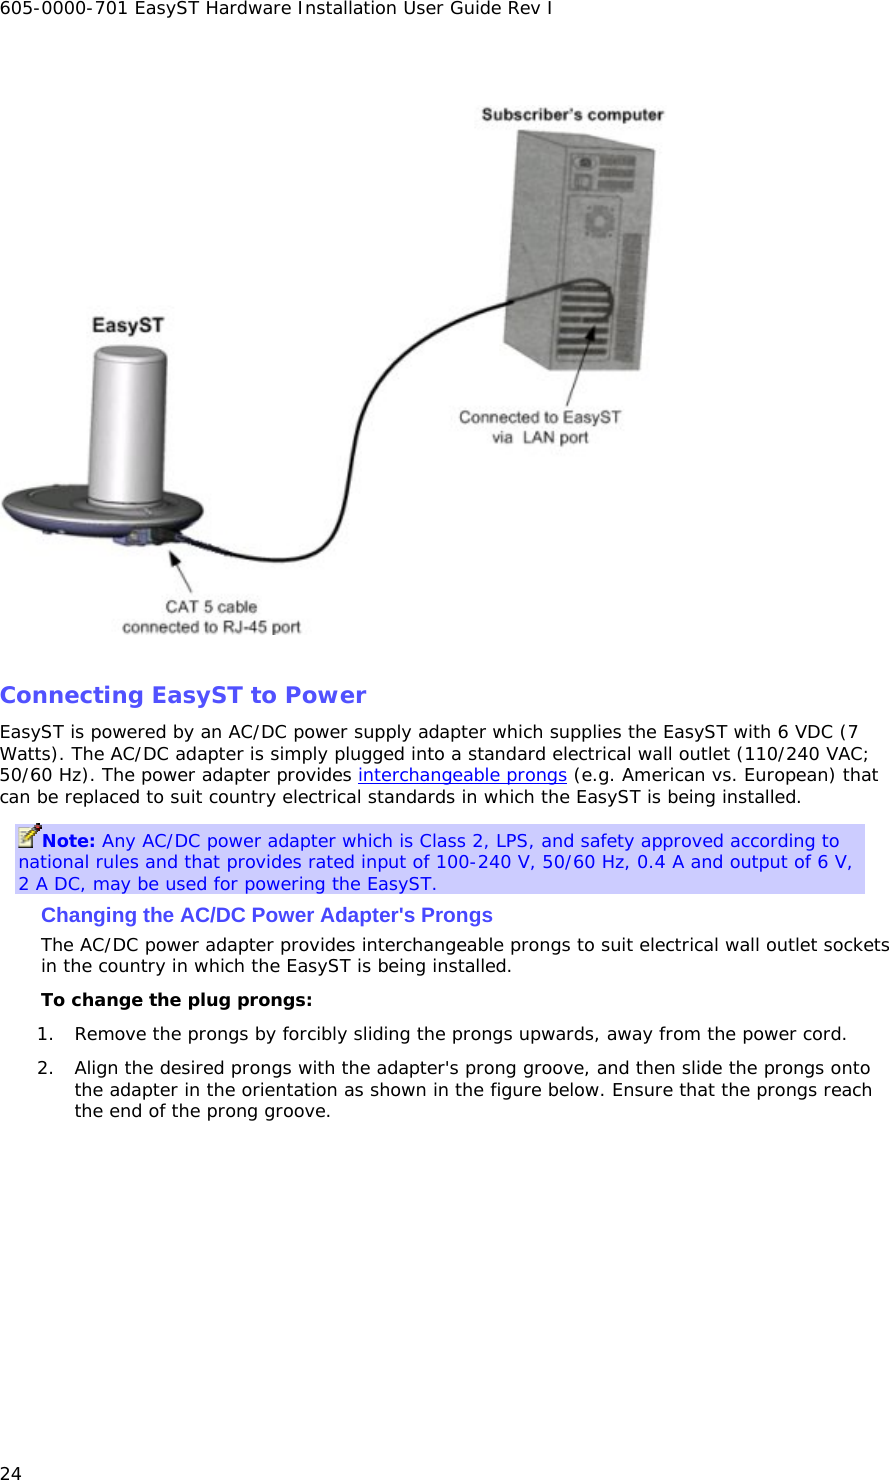 605-0000-701 EasyST Hardware Installation User Guide Rev I 24    Connecting EasyST to Power EasyST is powered by an AC/DC power supply adapter which supplies the EasyST with 6 VDC (7 Watts). The AC/DC adapter is simply plugged into a standard electrical wall outlet (110/240 VAC; 50/60 Hz). The power adapter provides interchangeable prongs (e.g. American vs. European) that can be replaced to suit country electrical standards in which the EasyST is being installed. Note: Any AC/DC power adapter which is Class 2, LPS, and safety approved according to national rules and that provides rated input of 100-240 V, 50/60 Hz, 0.4 A and output of 6 V, 2 A DC, may be used for powering the EasyST. Changing the AC/DC Power Adapter&apos;s Prongs The AC/DC power adapter provides interchangeable prongs to suit electrical wall outlet sockets in the country in which the EasyST is being installed. To change the plug prongs: 1. Remove the prongs by forcibly sliding the prongs upwards, away from the power cord. 2. Align the desired prongs with the adapter&apos;s prong groove, and then slide the prongs onto the adapter in the orientation as shown in the figure below. Ensure that the prongs reach the end of the prong groove. 